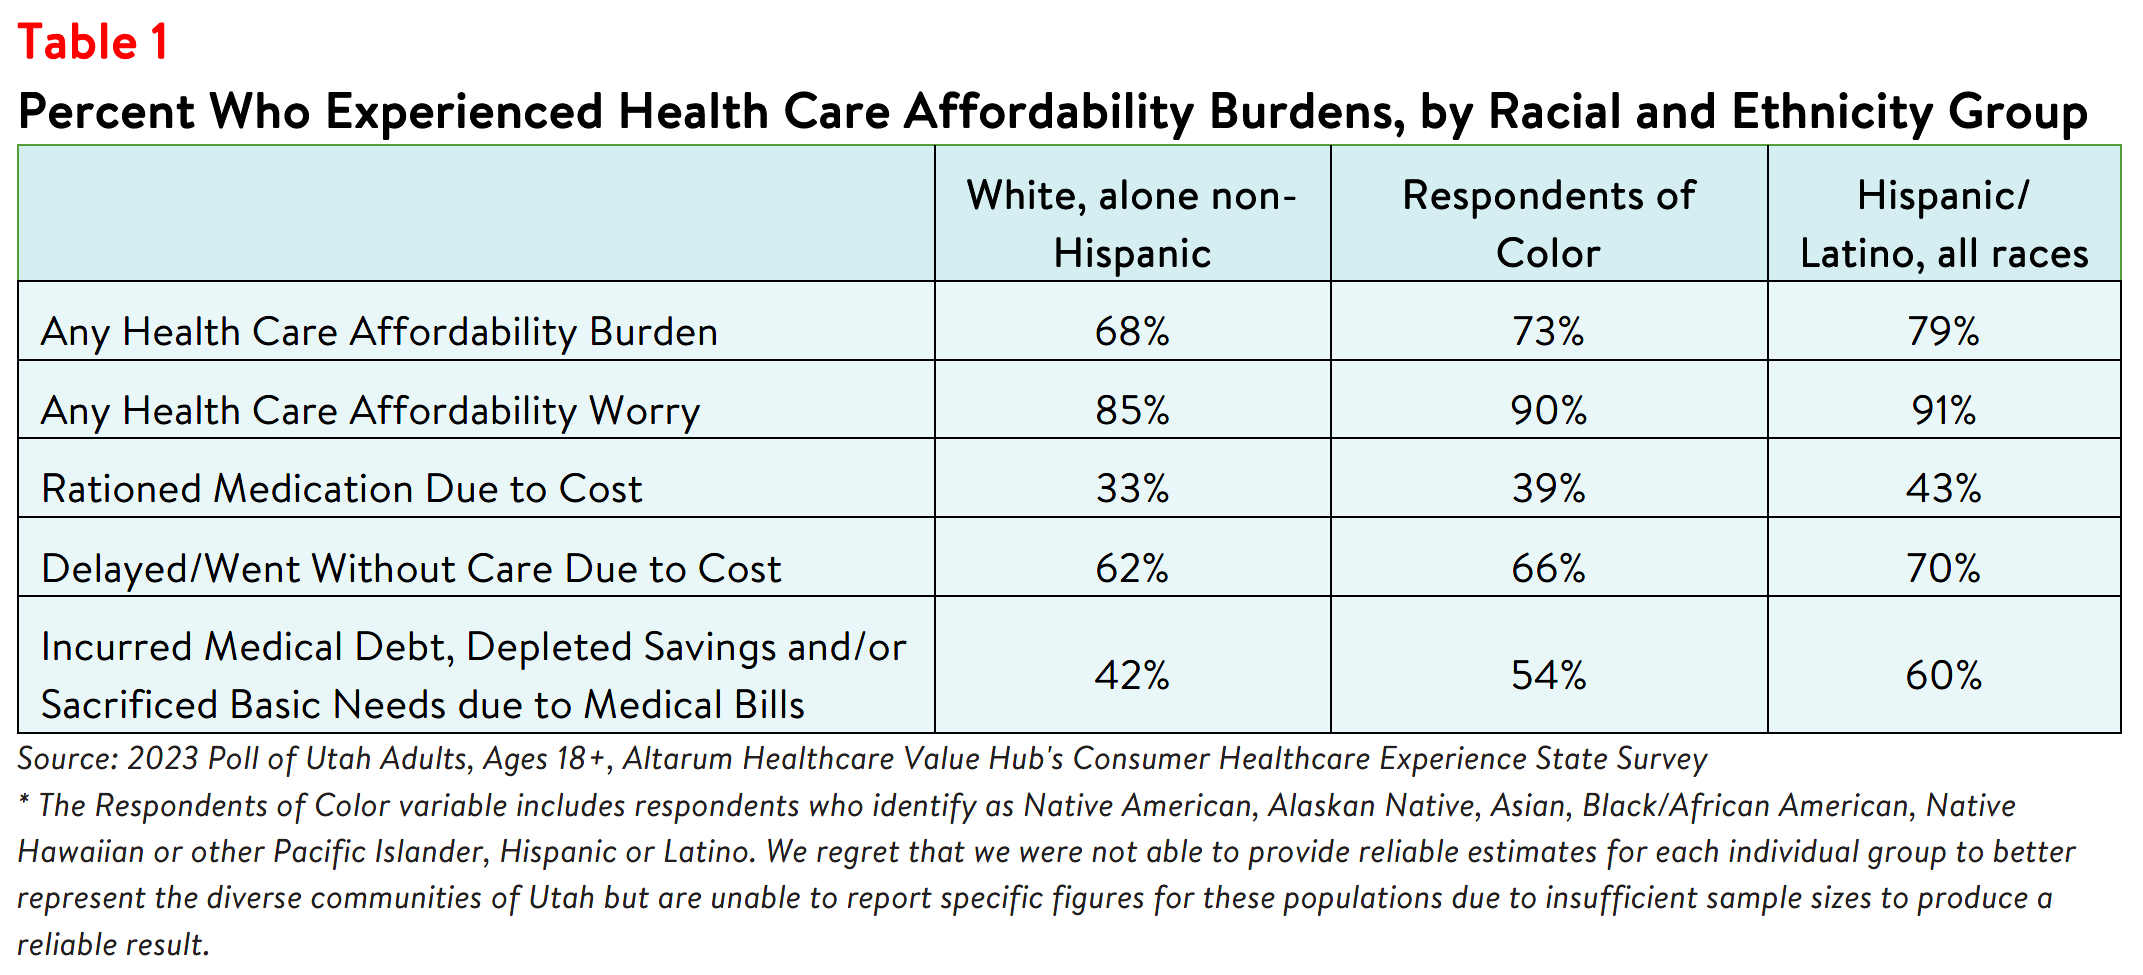 Utah Residents Bear Health Care Affordability Burdens Unequally_Table1.png